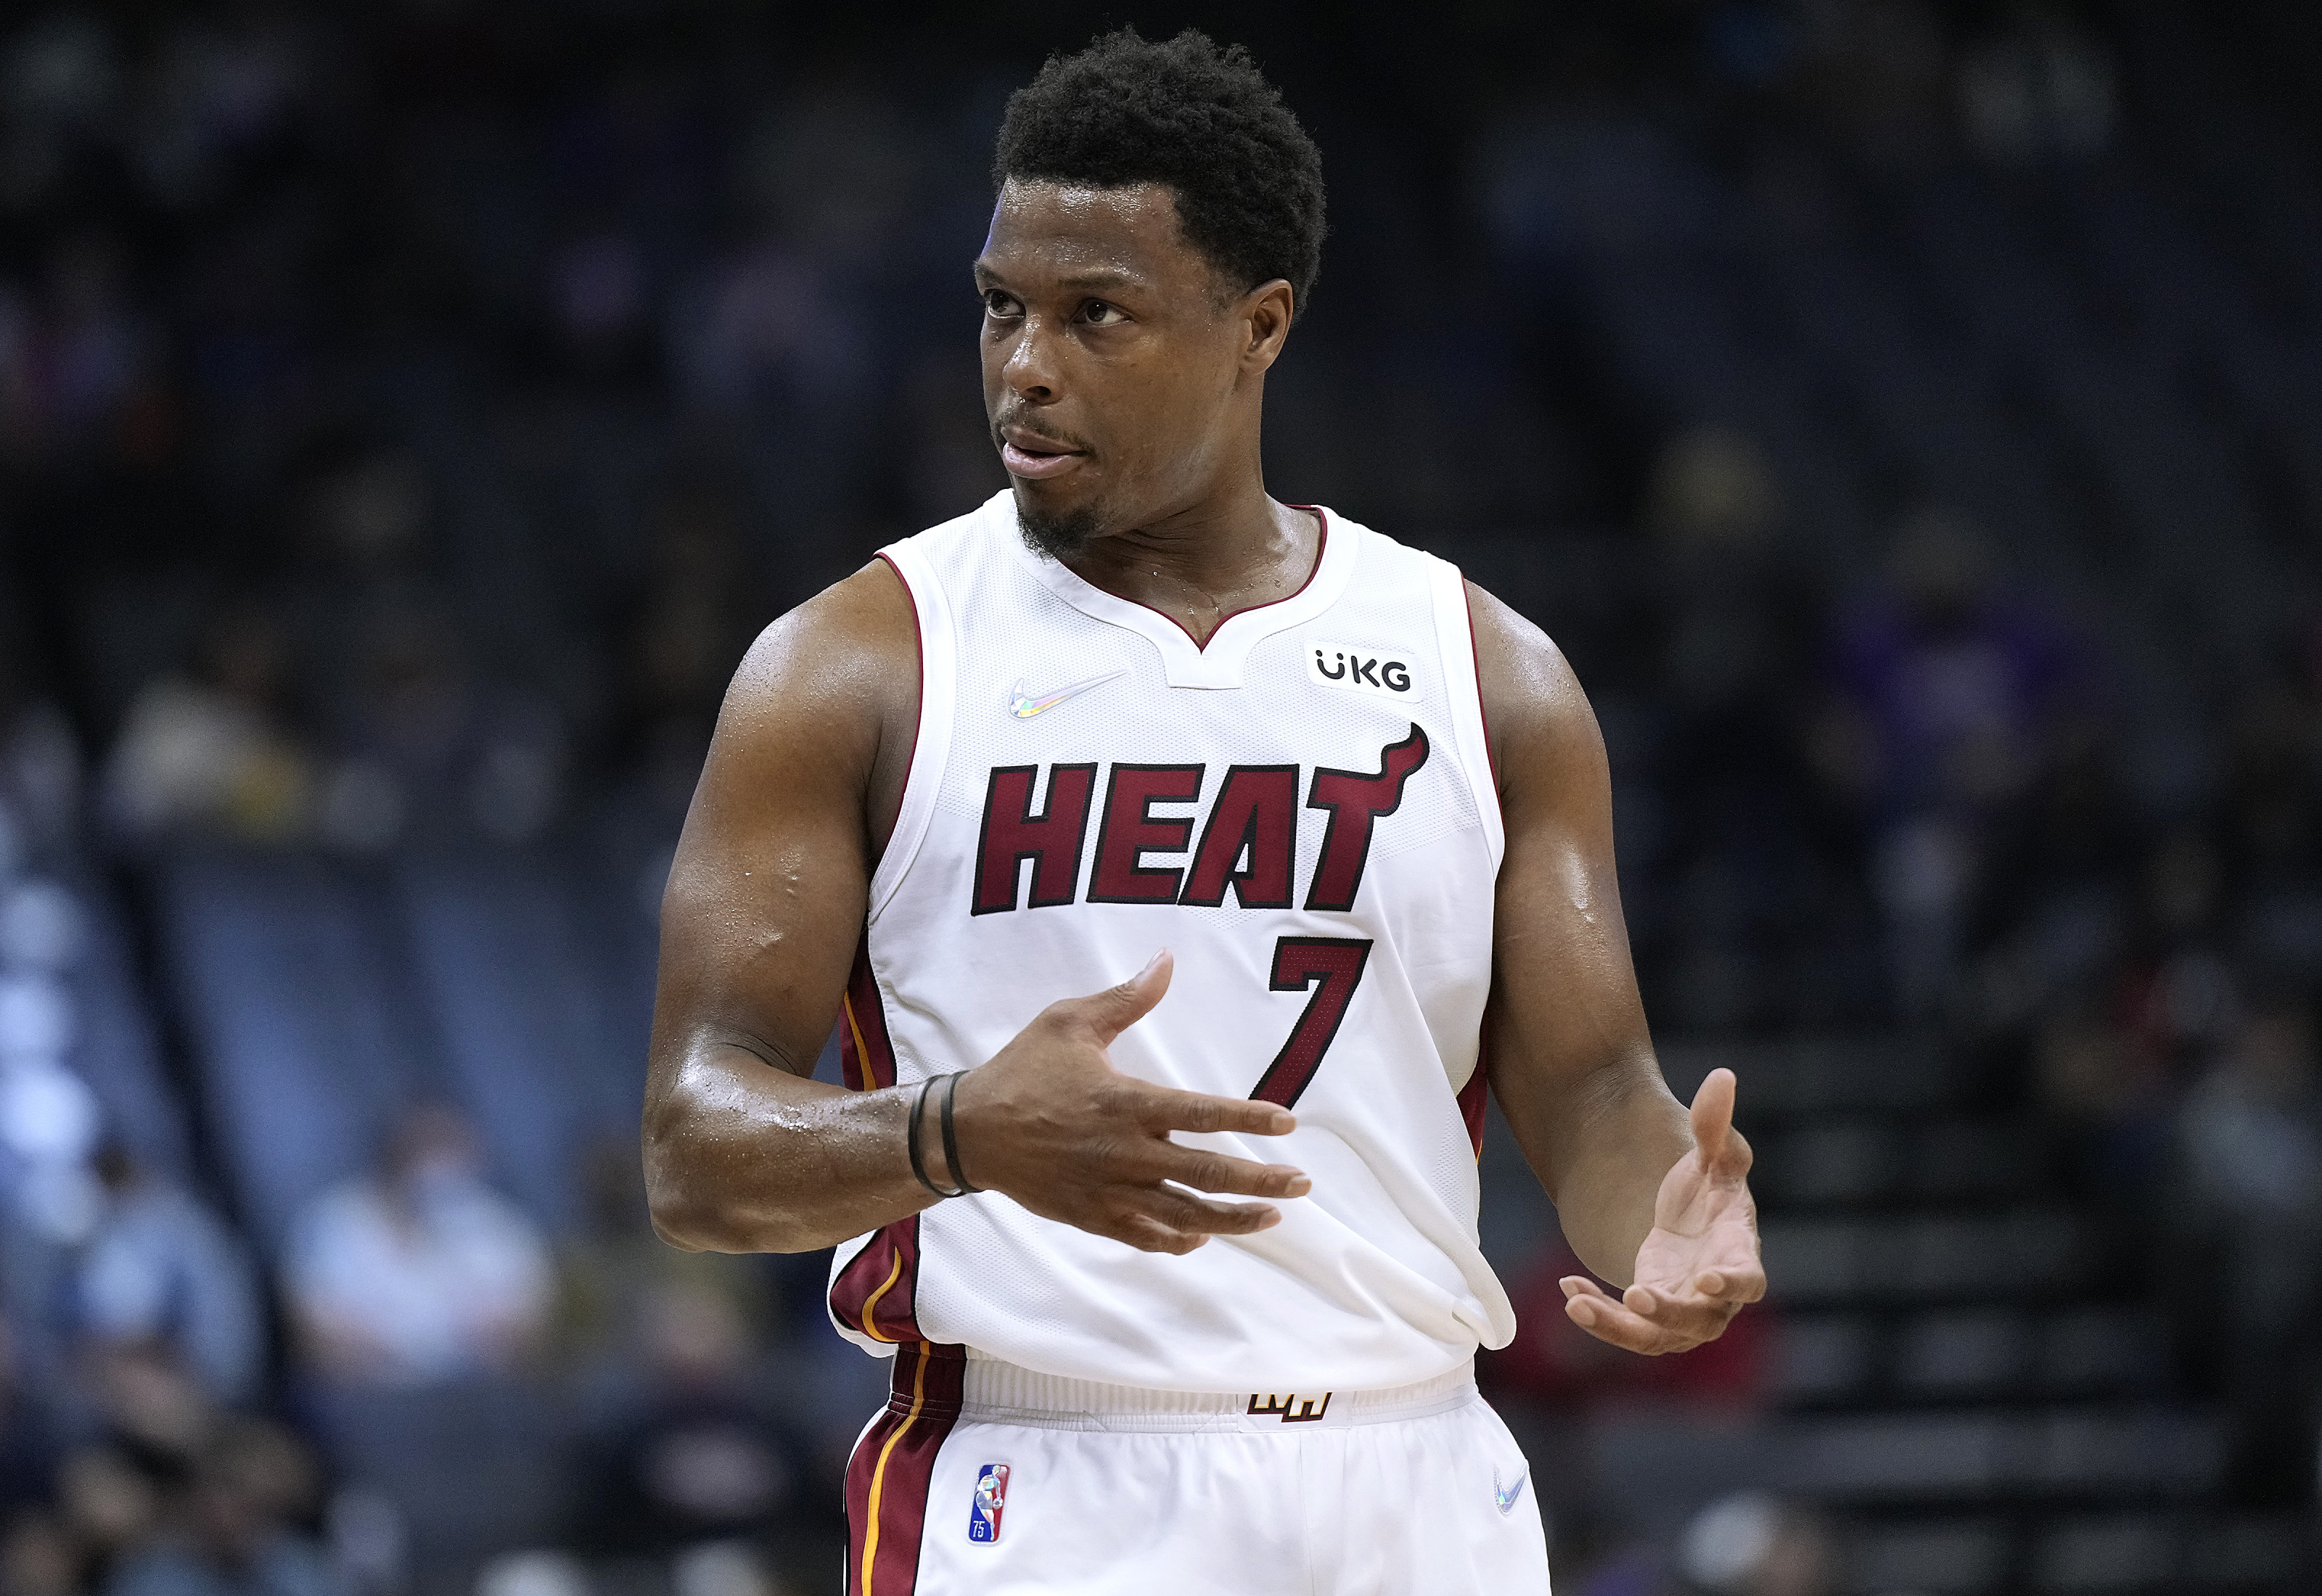 Can Kyle Lowry Help the Heat Re-Emerge as a Contender?